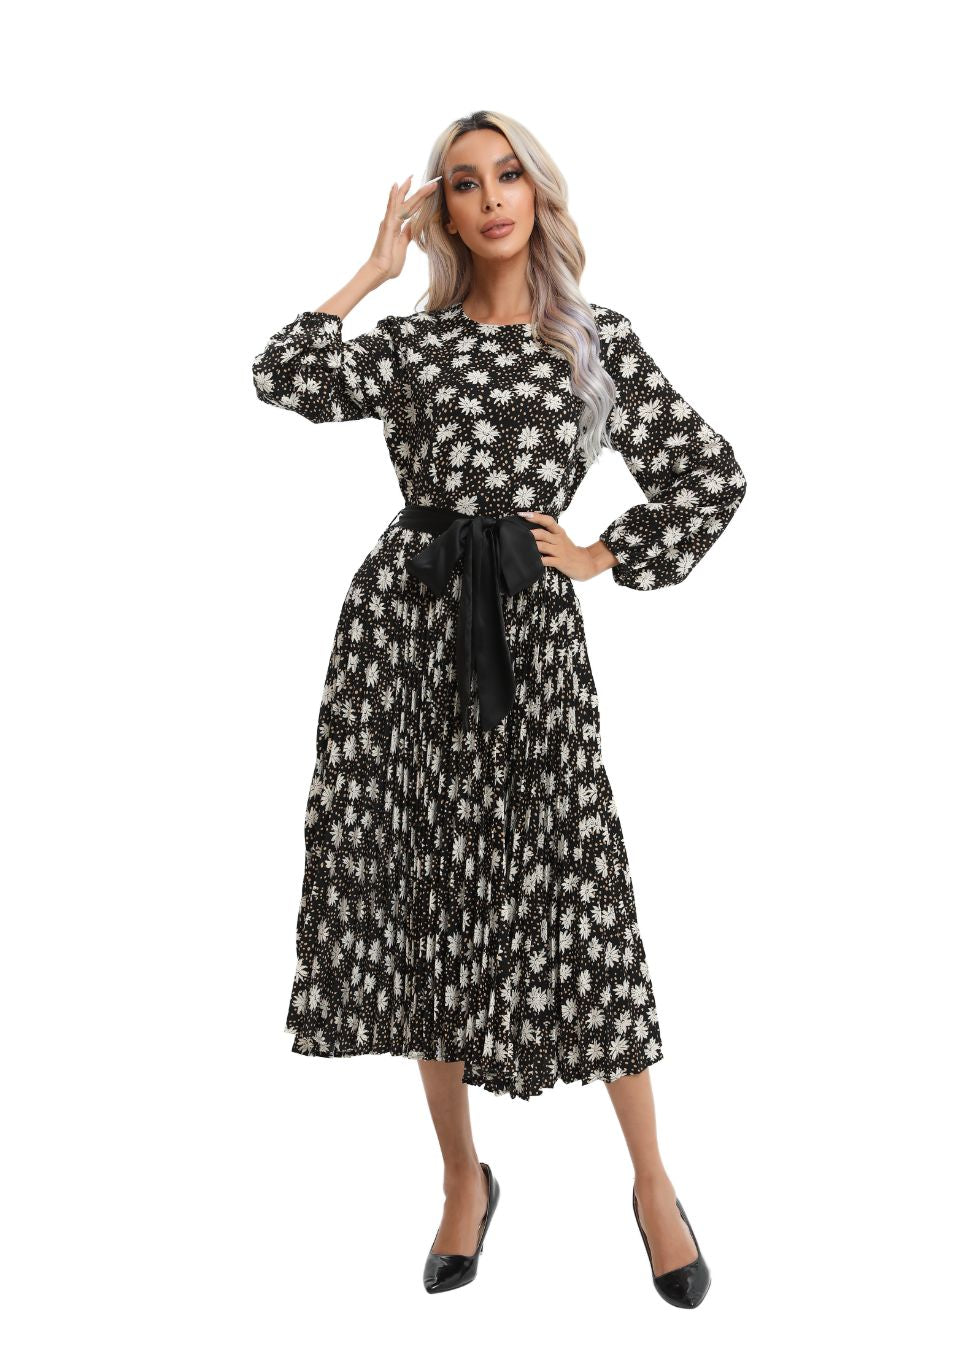 Modest Floral Midi Dress with Front Tie - seilerlanguageservices